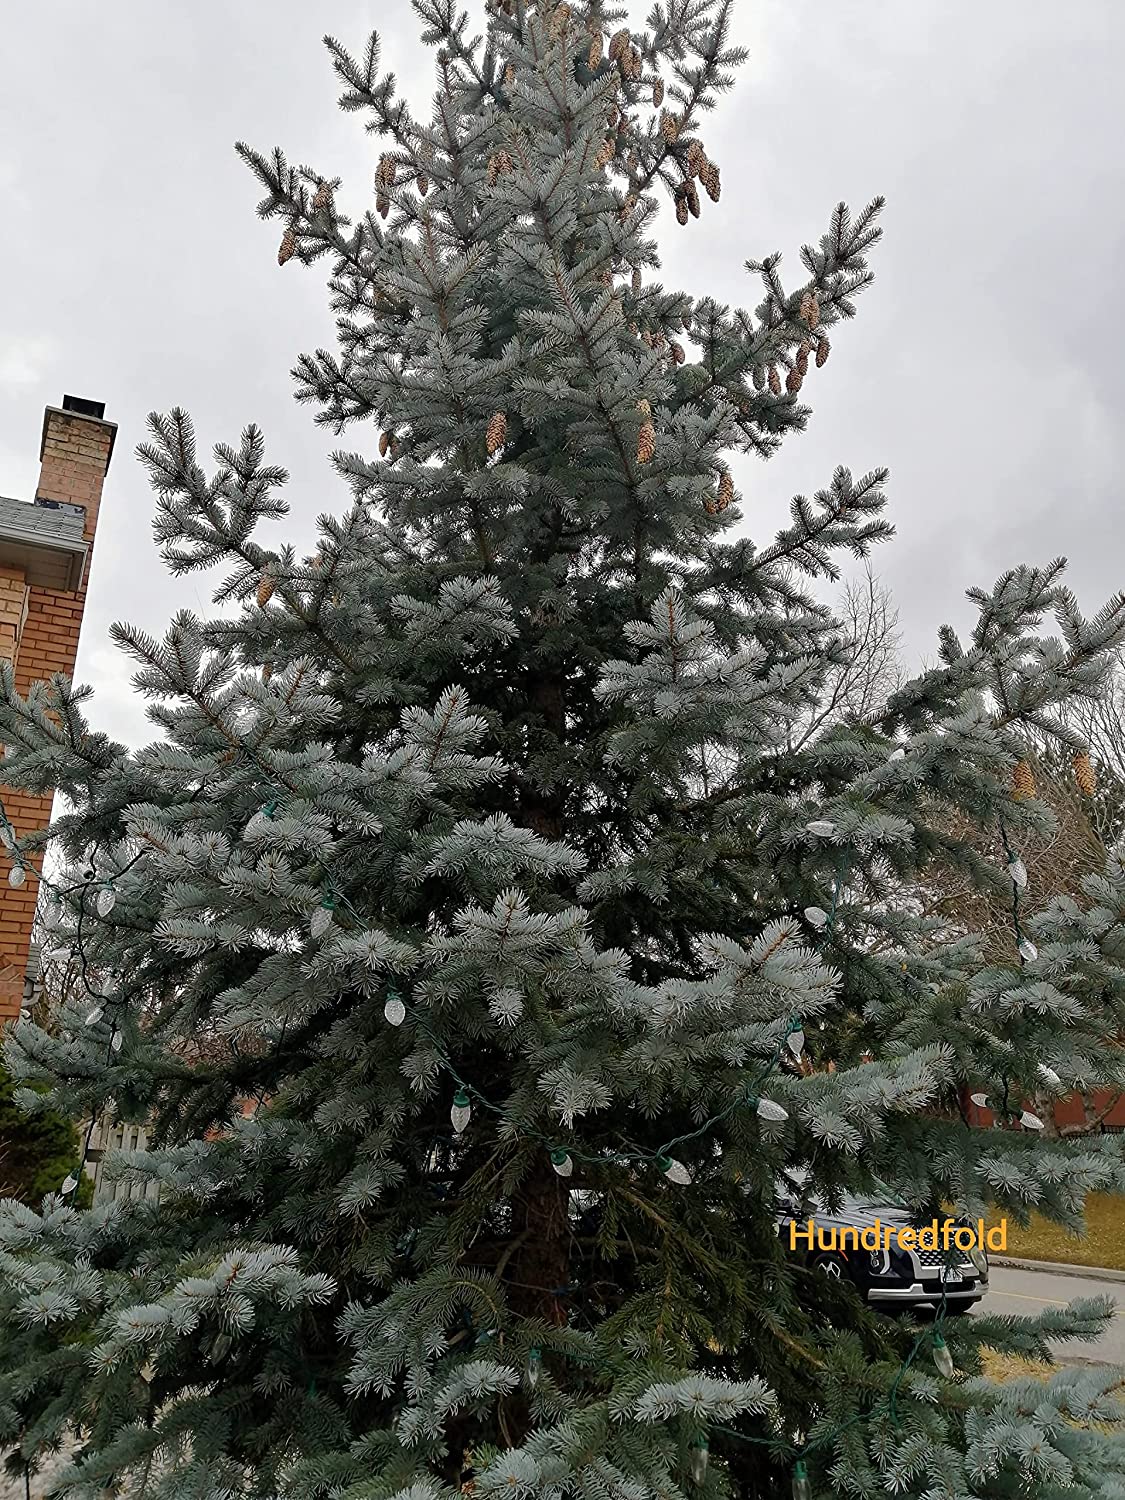 Hundredfold Blue Spruce 30 Tree Seeds - Picea pungens Colorado Spruce USA Rocky Mountains Native, Ontario Grown, for Privacy Screen, Christmas Tree or Bonsai Houseplant